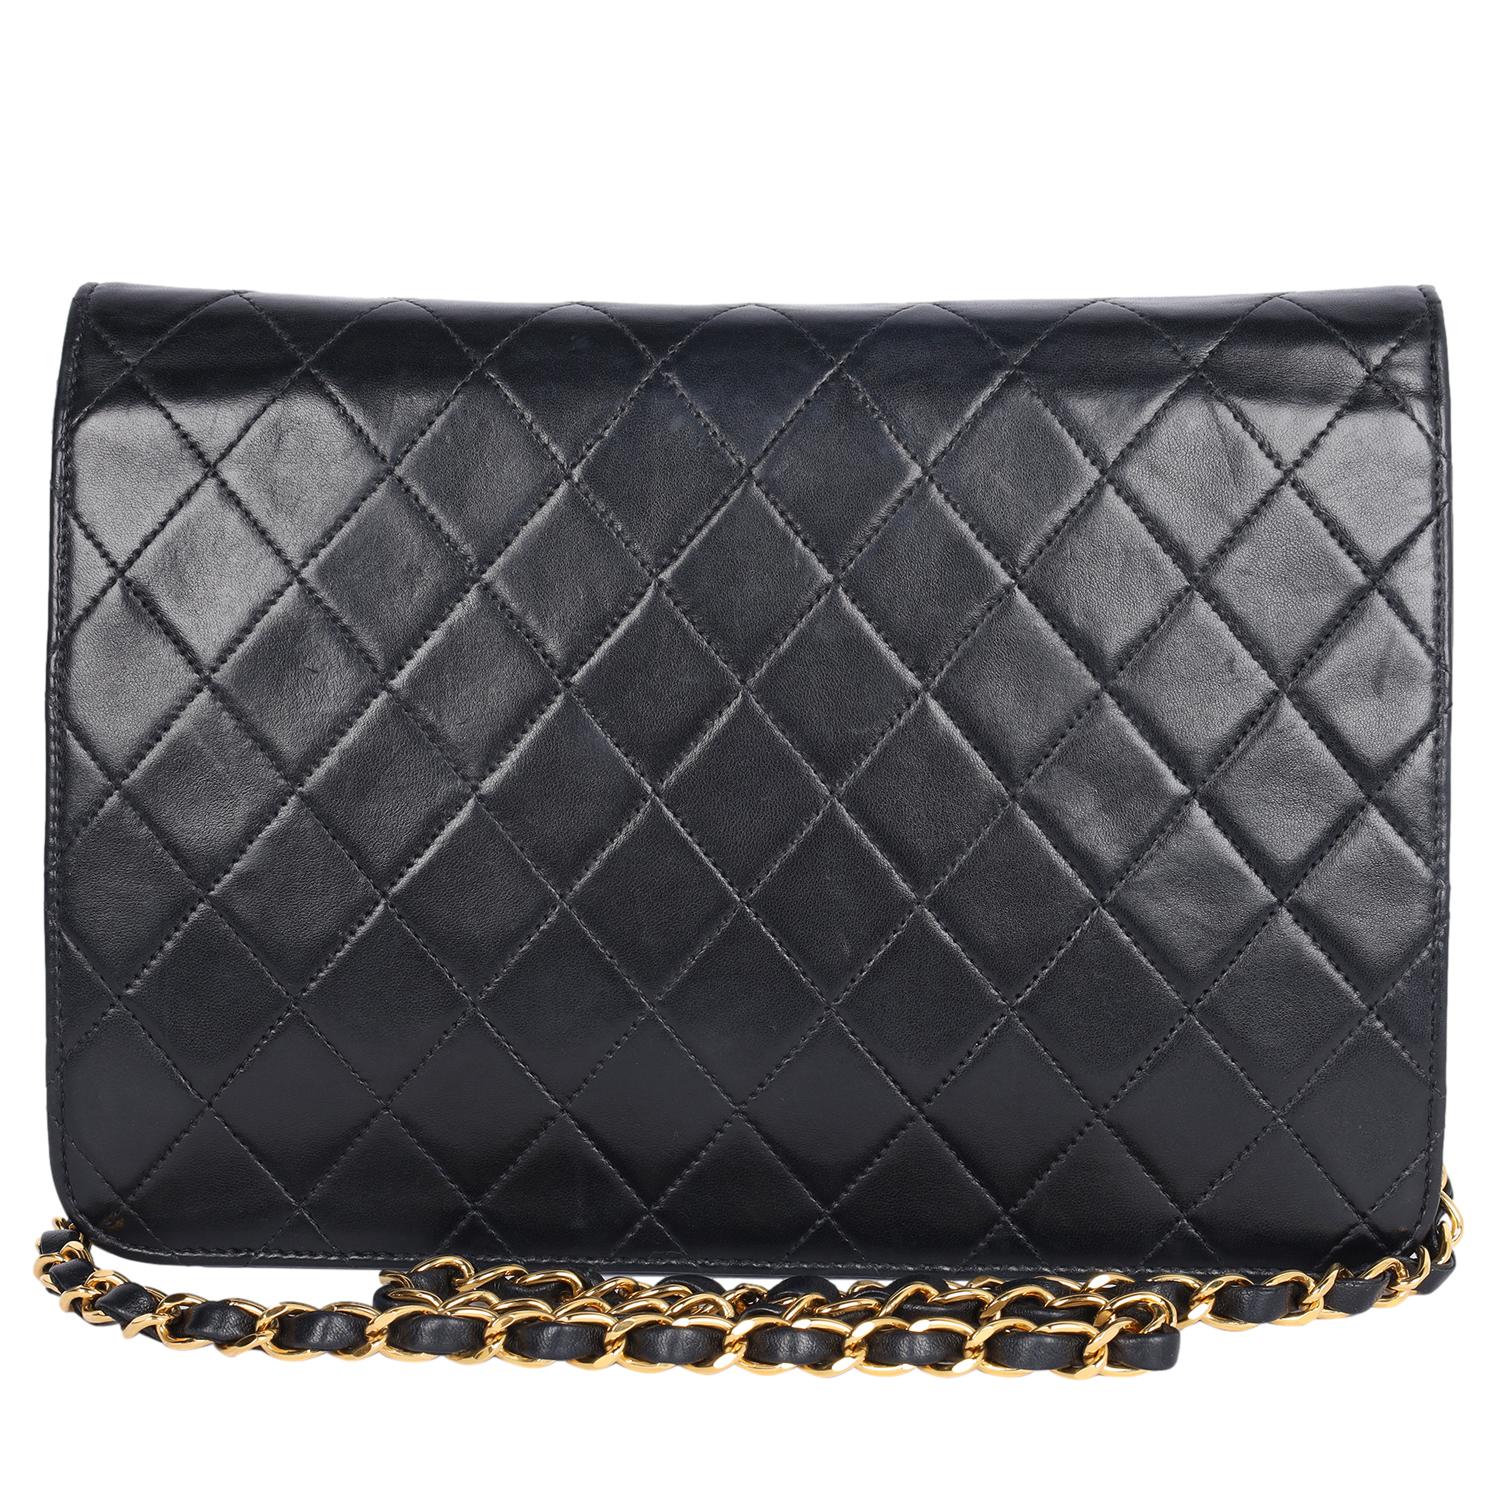 Chanel Black Classic Front Flap Quilted Leather Shoulder Bag For Sale 1